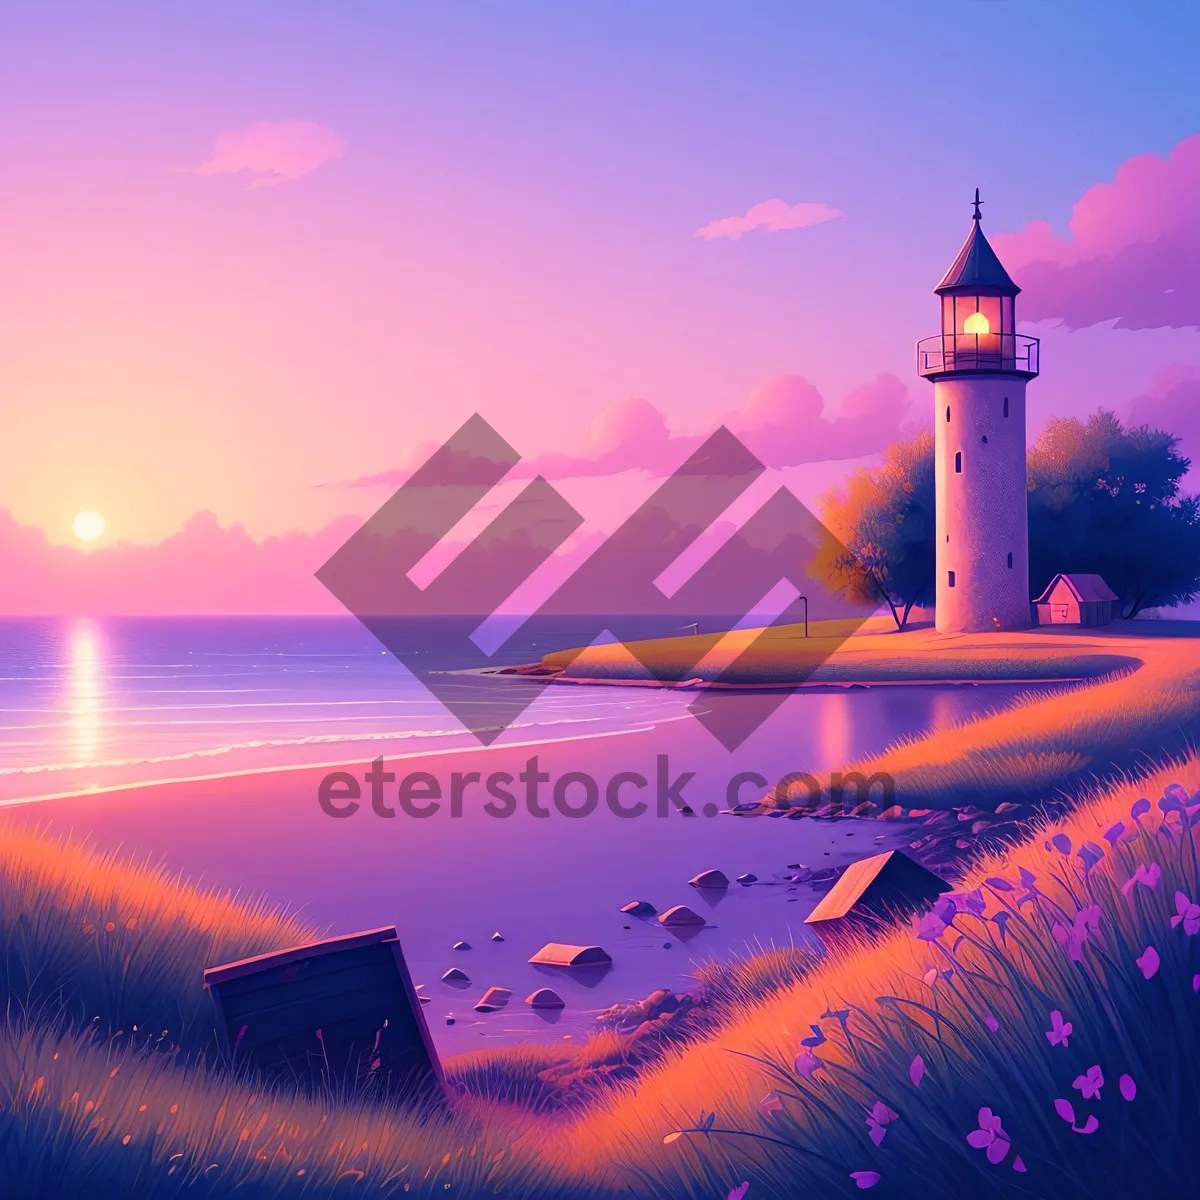 Picture of Coastal Lighthouse at Sunset: Majestic Beacon overlooking the Ocean